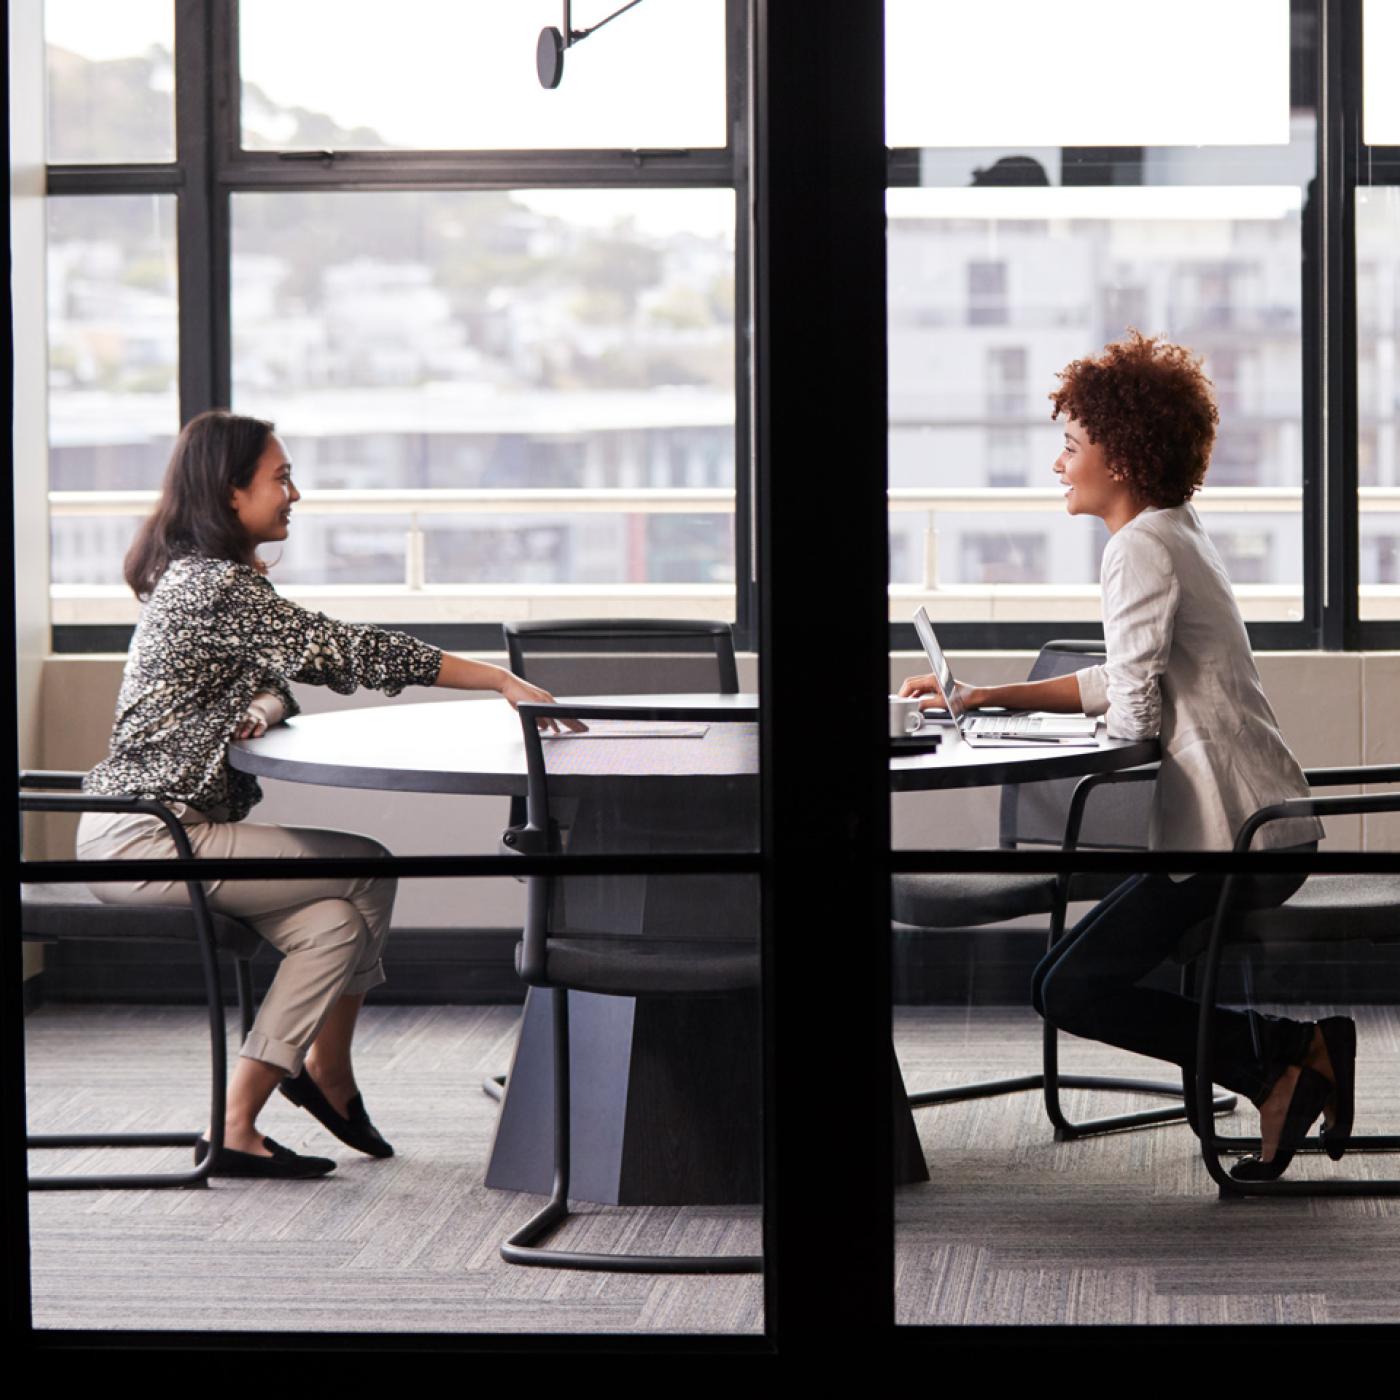 Sideview of two women sitting at a meeting table in an office in front of windows